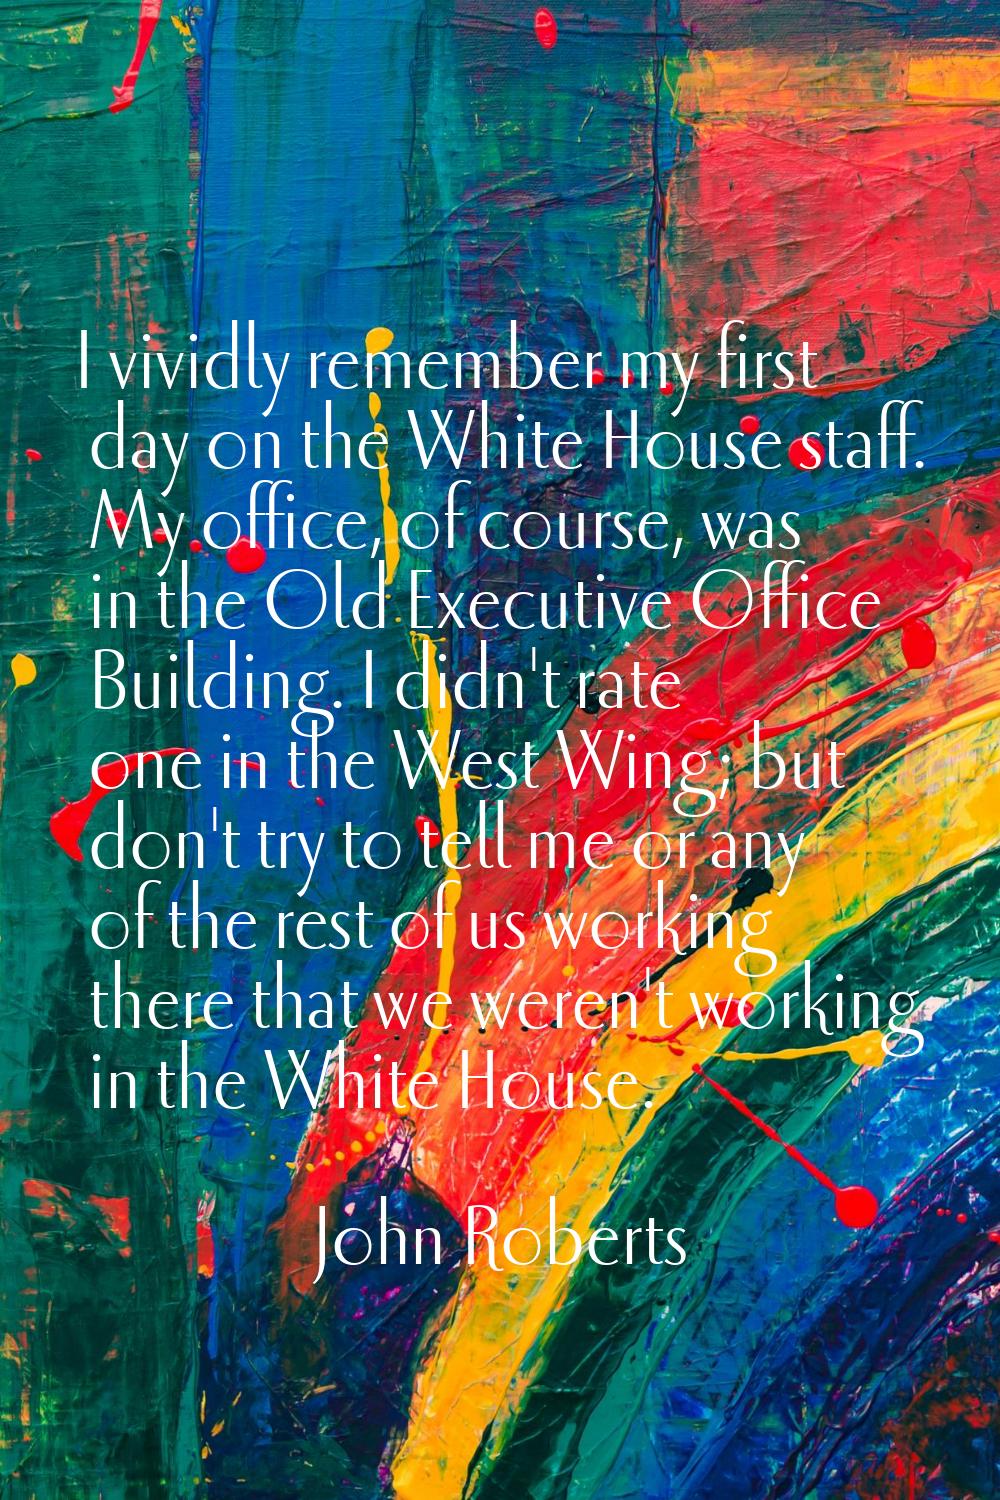 I vividly remember my first day on the White House staff. My office, of course, was in the Old Exec